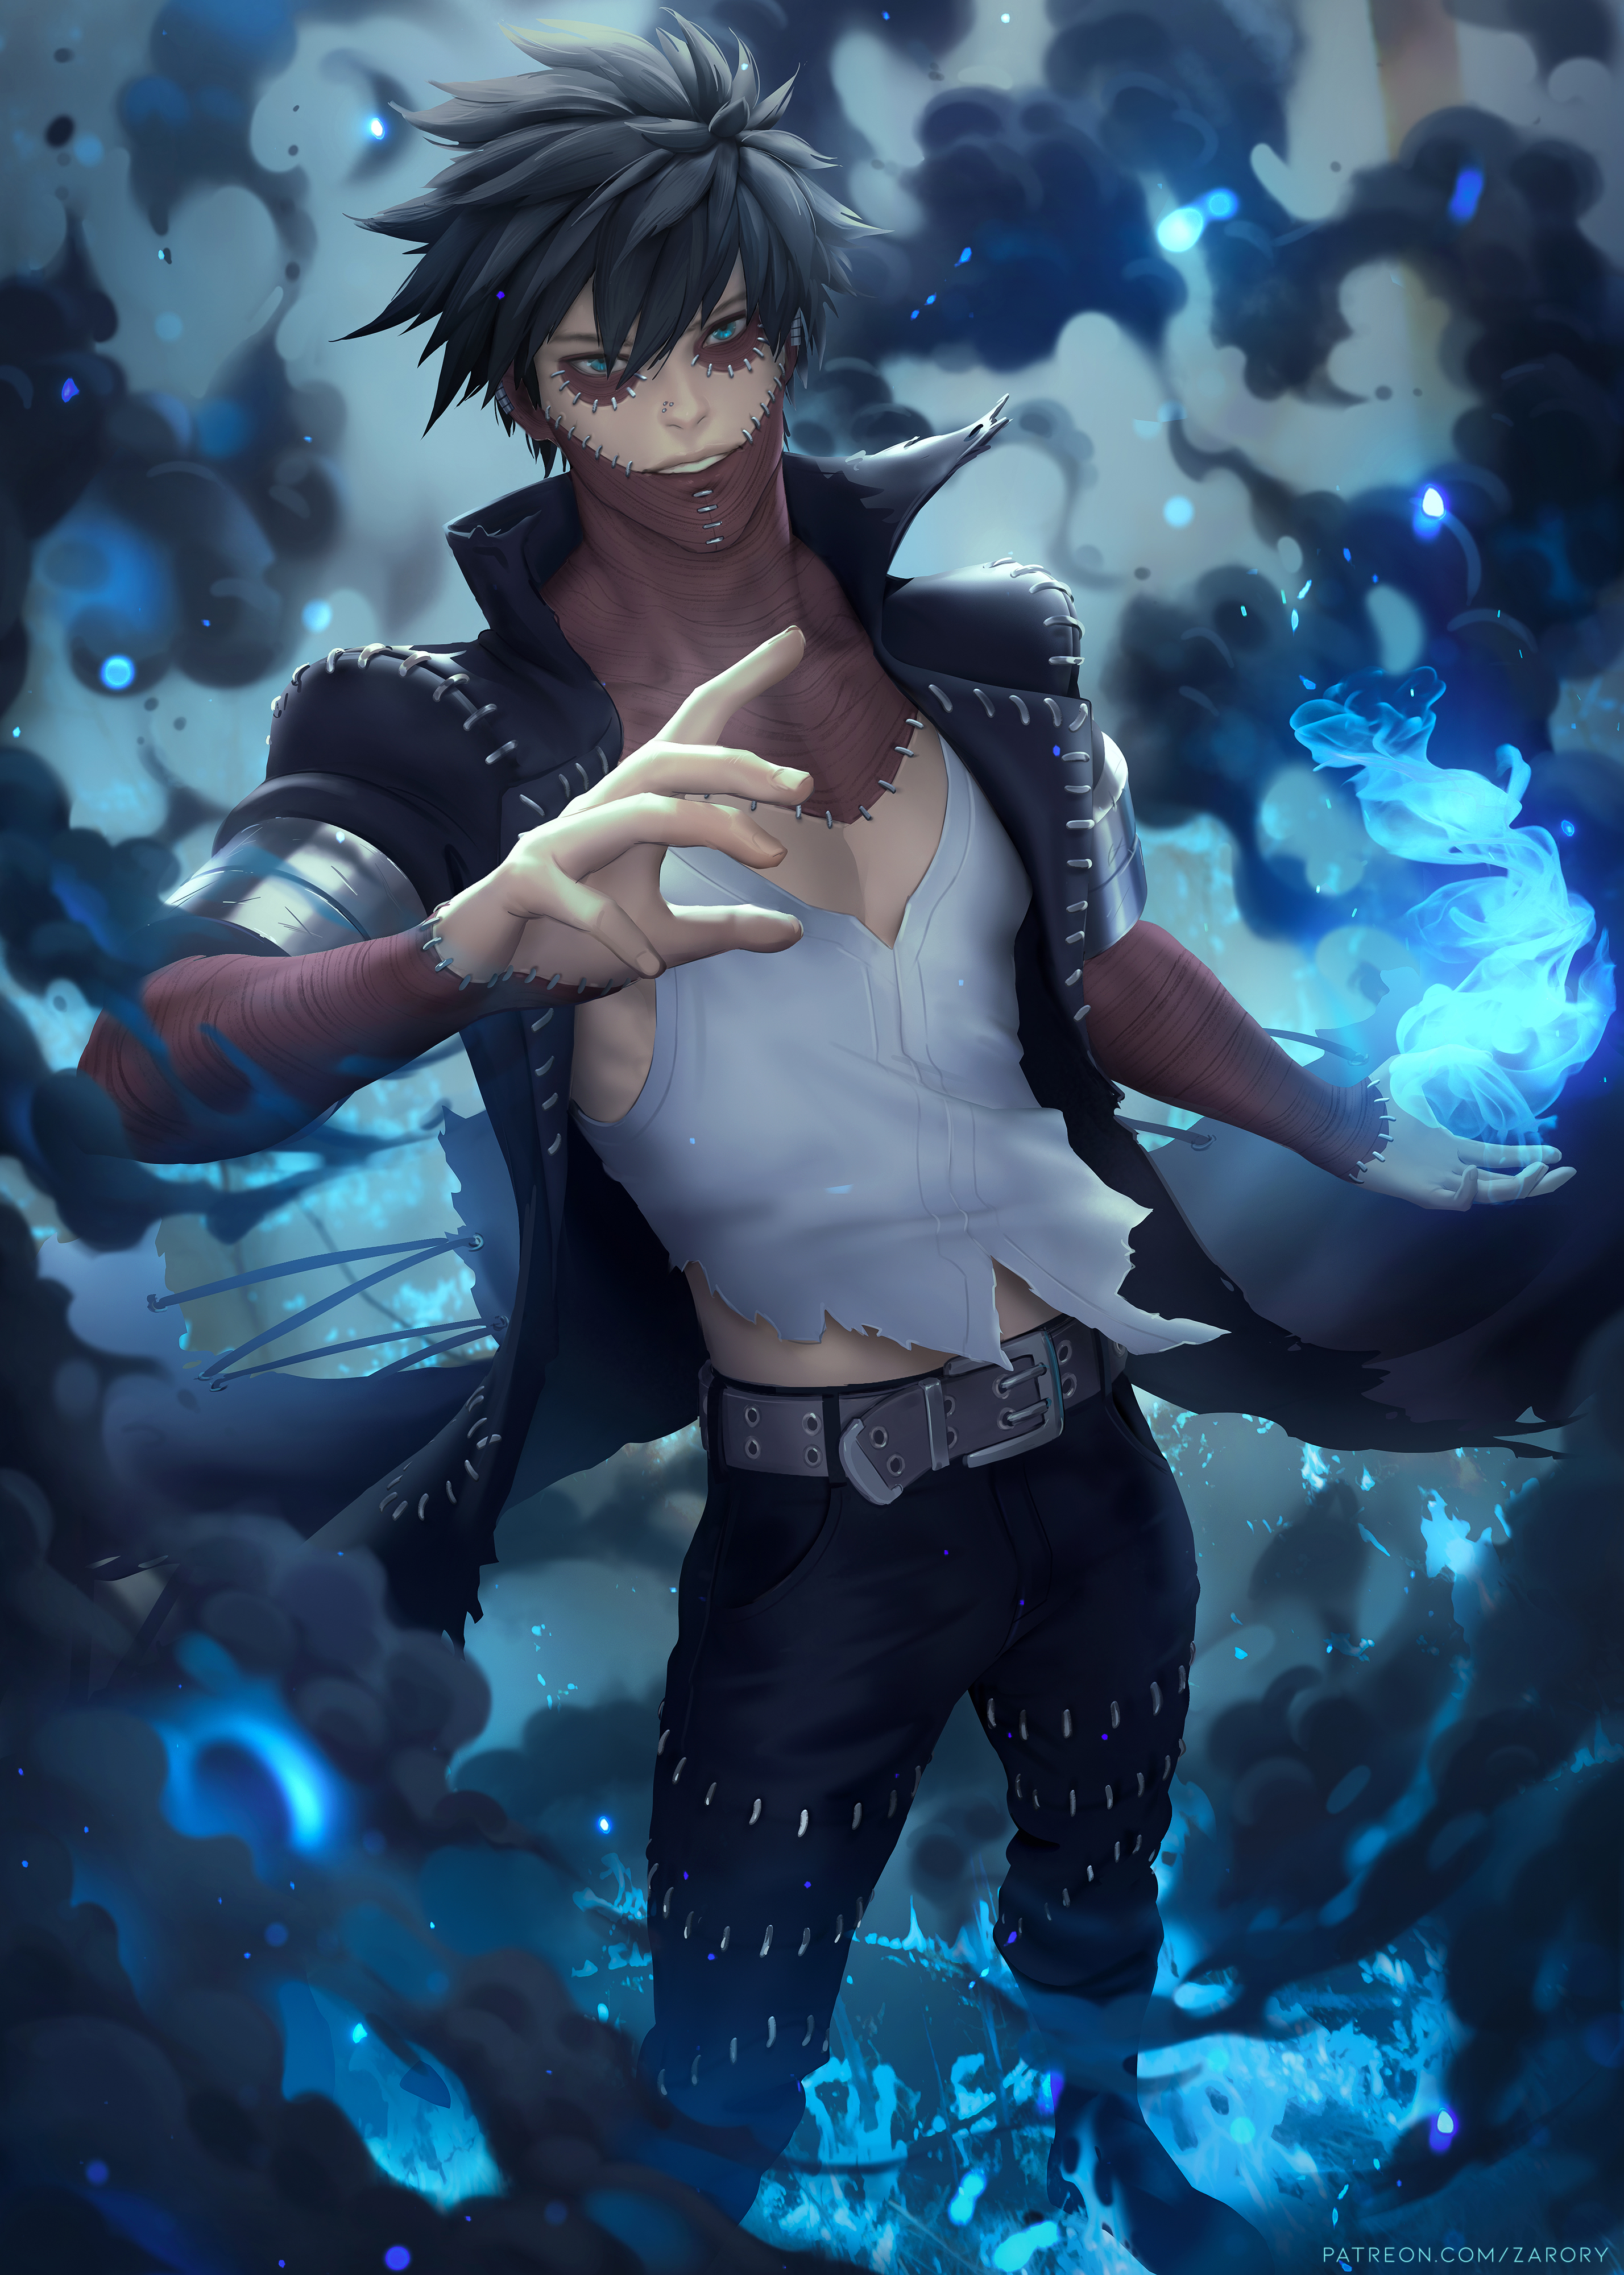 Anime 2856x4000 Dabi Boku no Hero Academia anime anime boys artwork drawing fan art Zarory blue flames fire burning black hair portrait display standing looking at viewer short hair watermarked blue eyes scars stitches belt